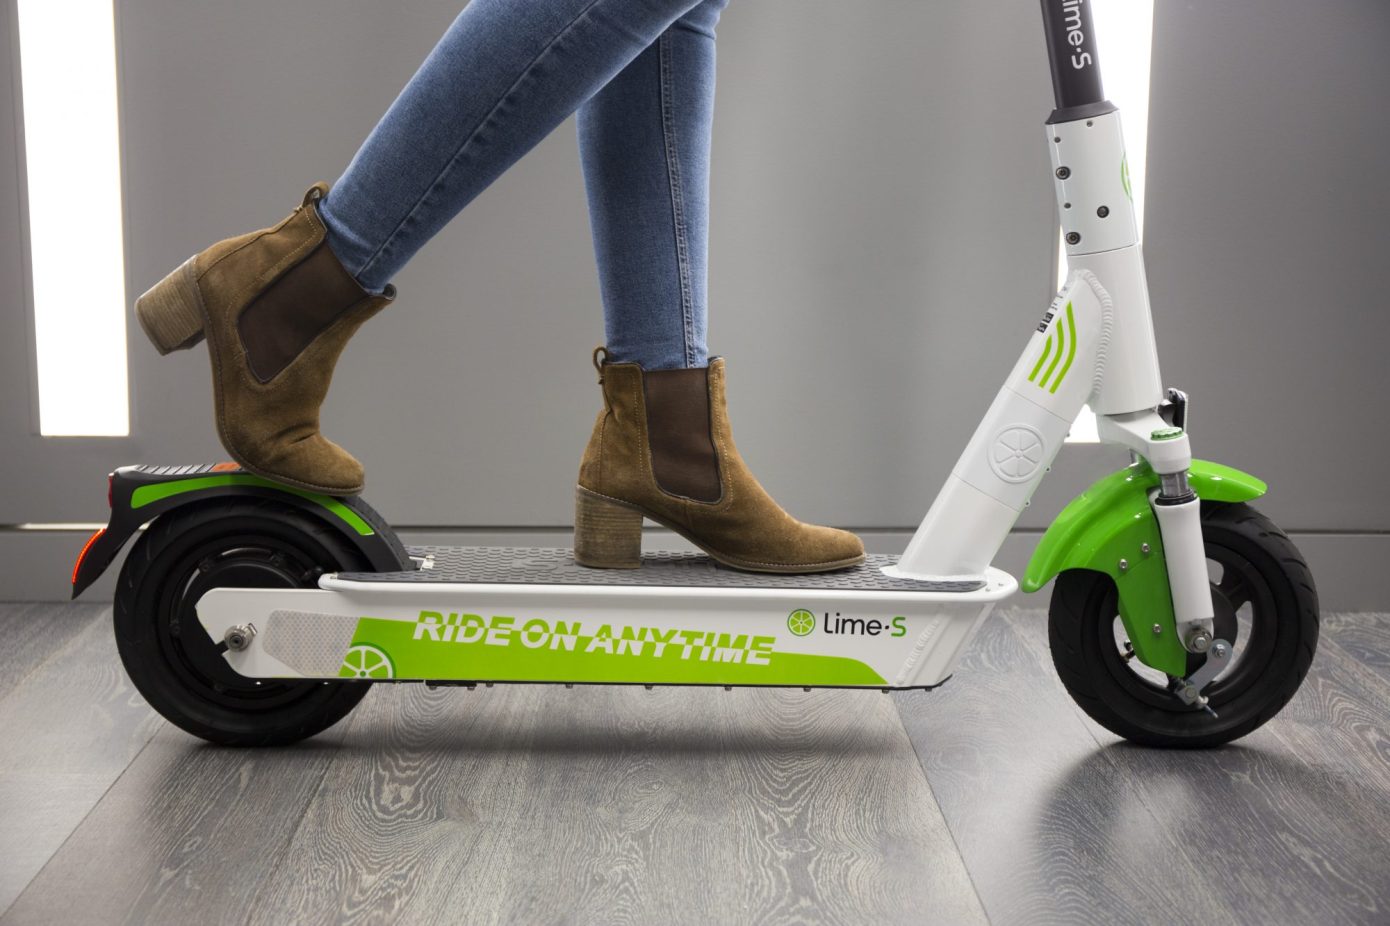 The New Service For Shared Scooters Lime Is Now Entering The Bulgarian Market